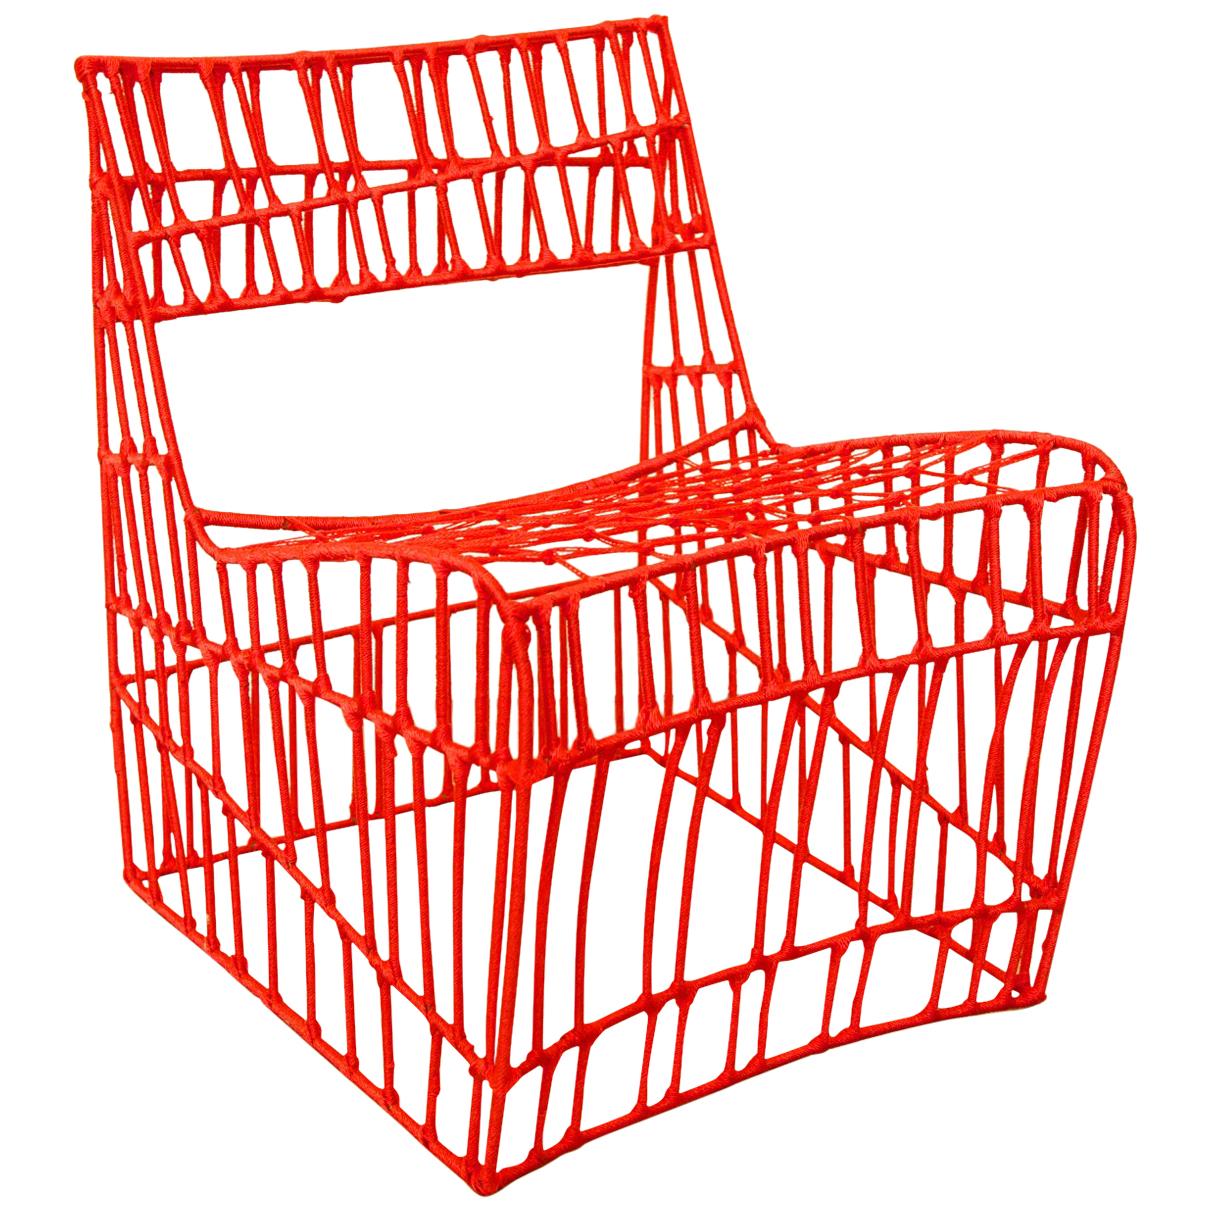 Contemporary Red Armchair from recycled metal and nylon wires by Cheick Diallo For Sale